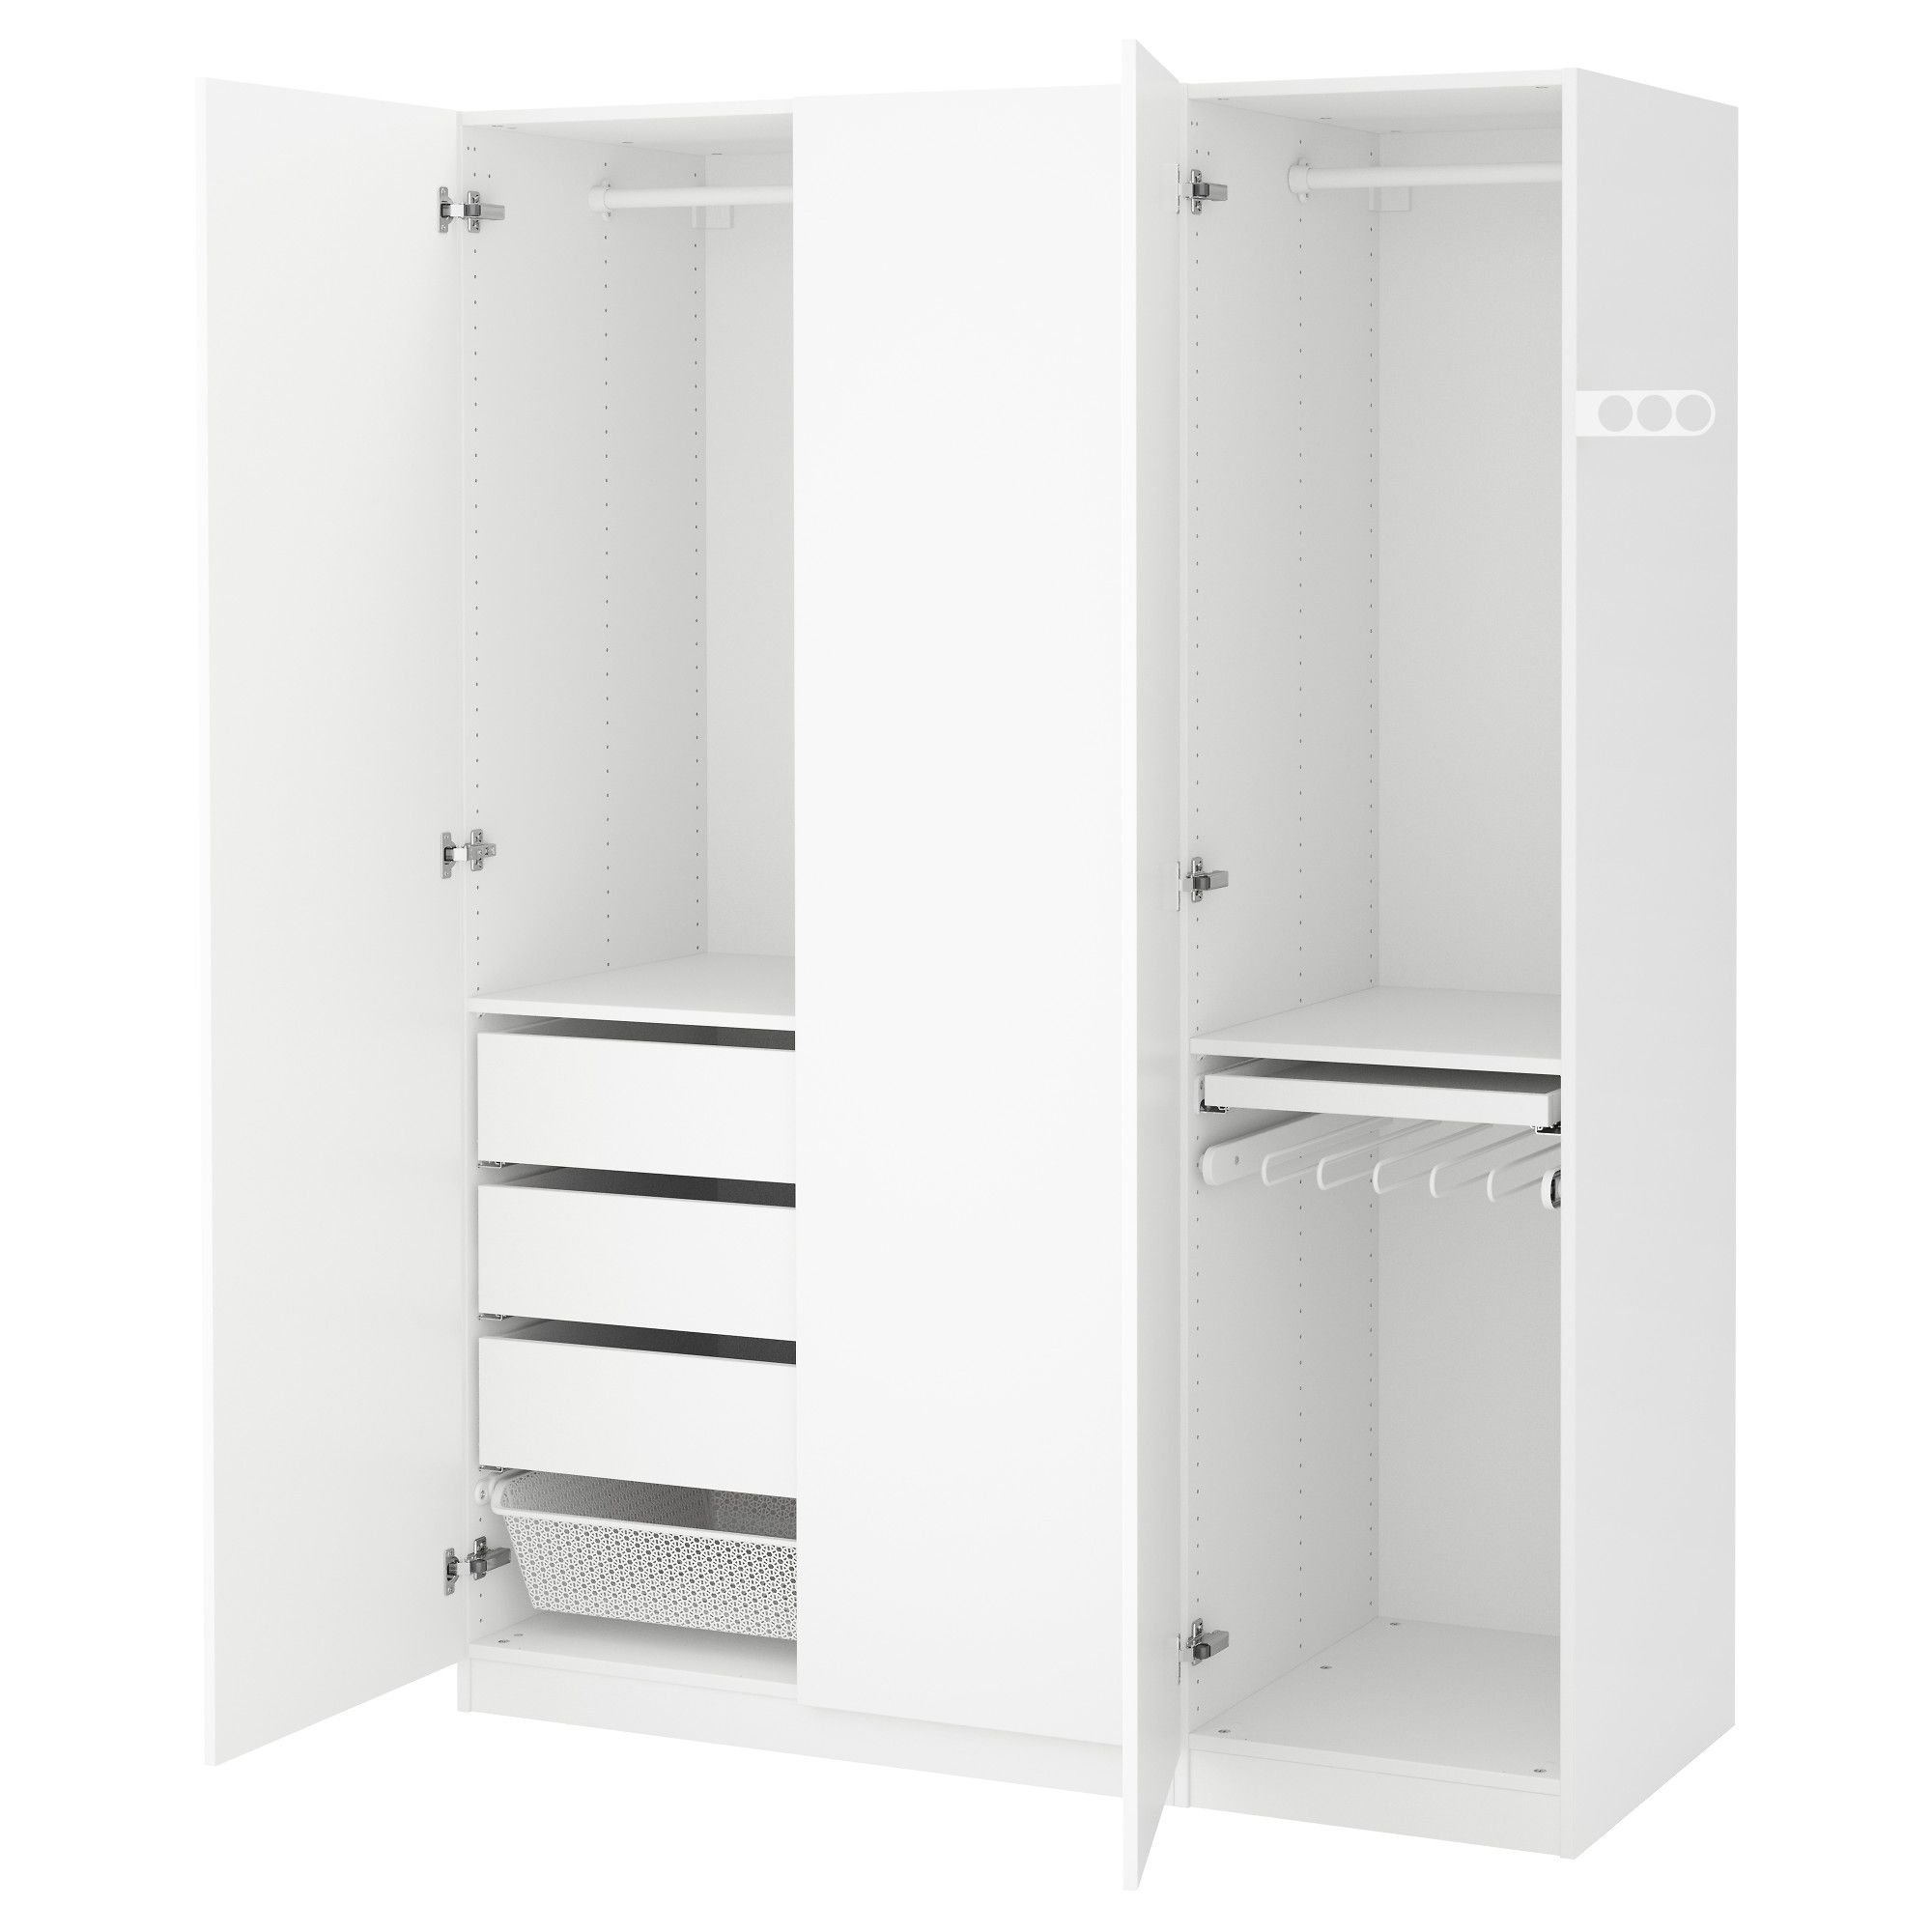 Wardrobes Pax System Ikea Inside Fitted Wardrobe Depth (View 14 of 15)